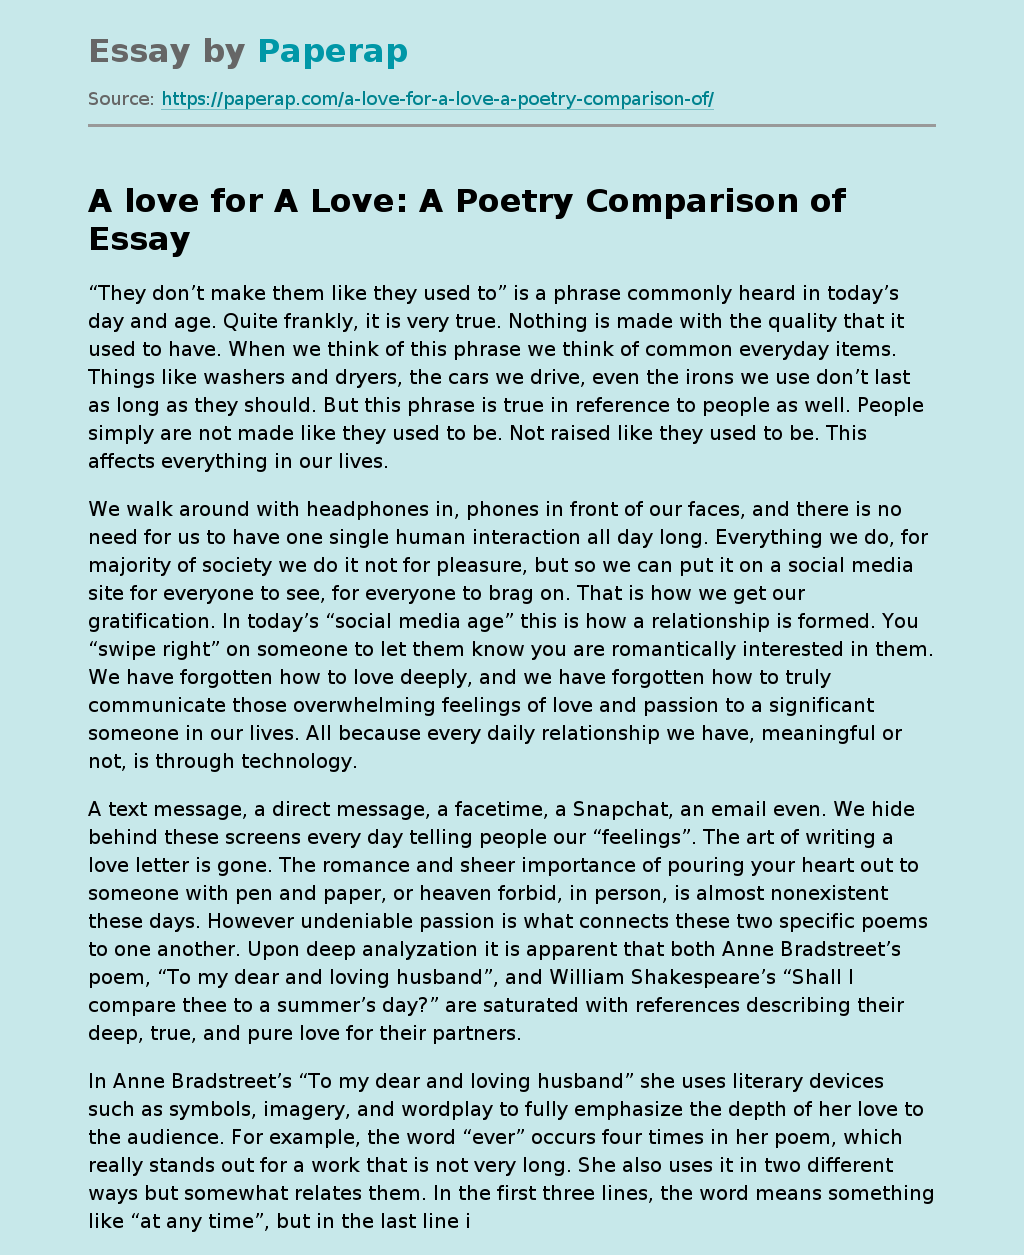 A love for A Love: A Poetry Comparison of